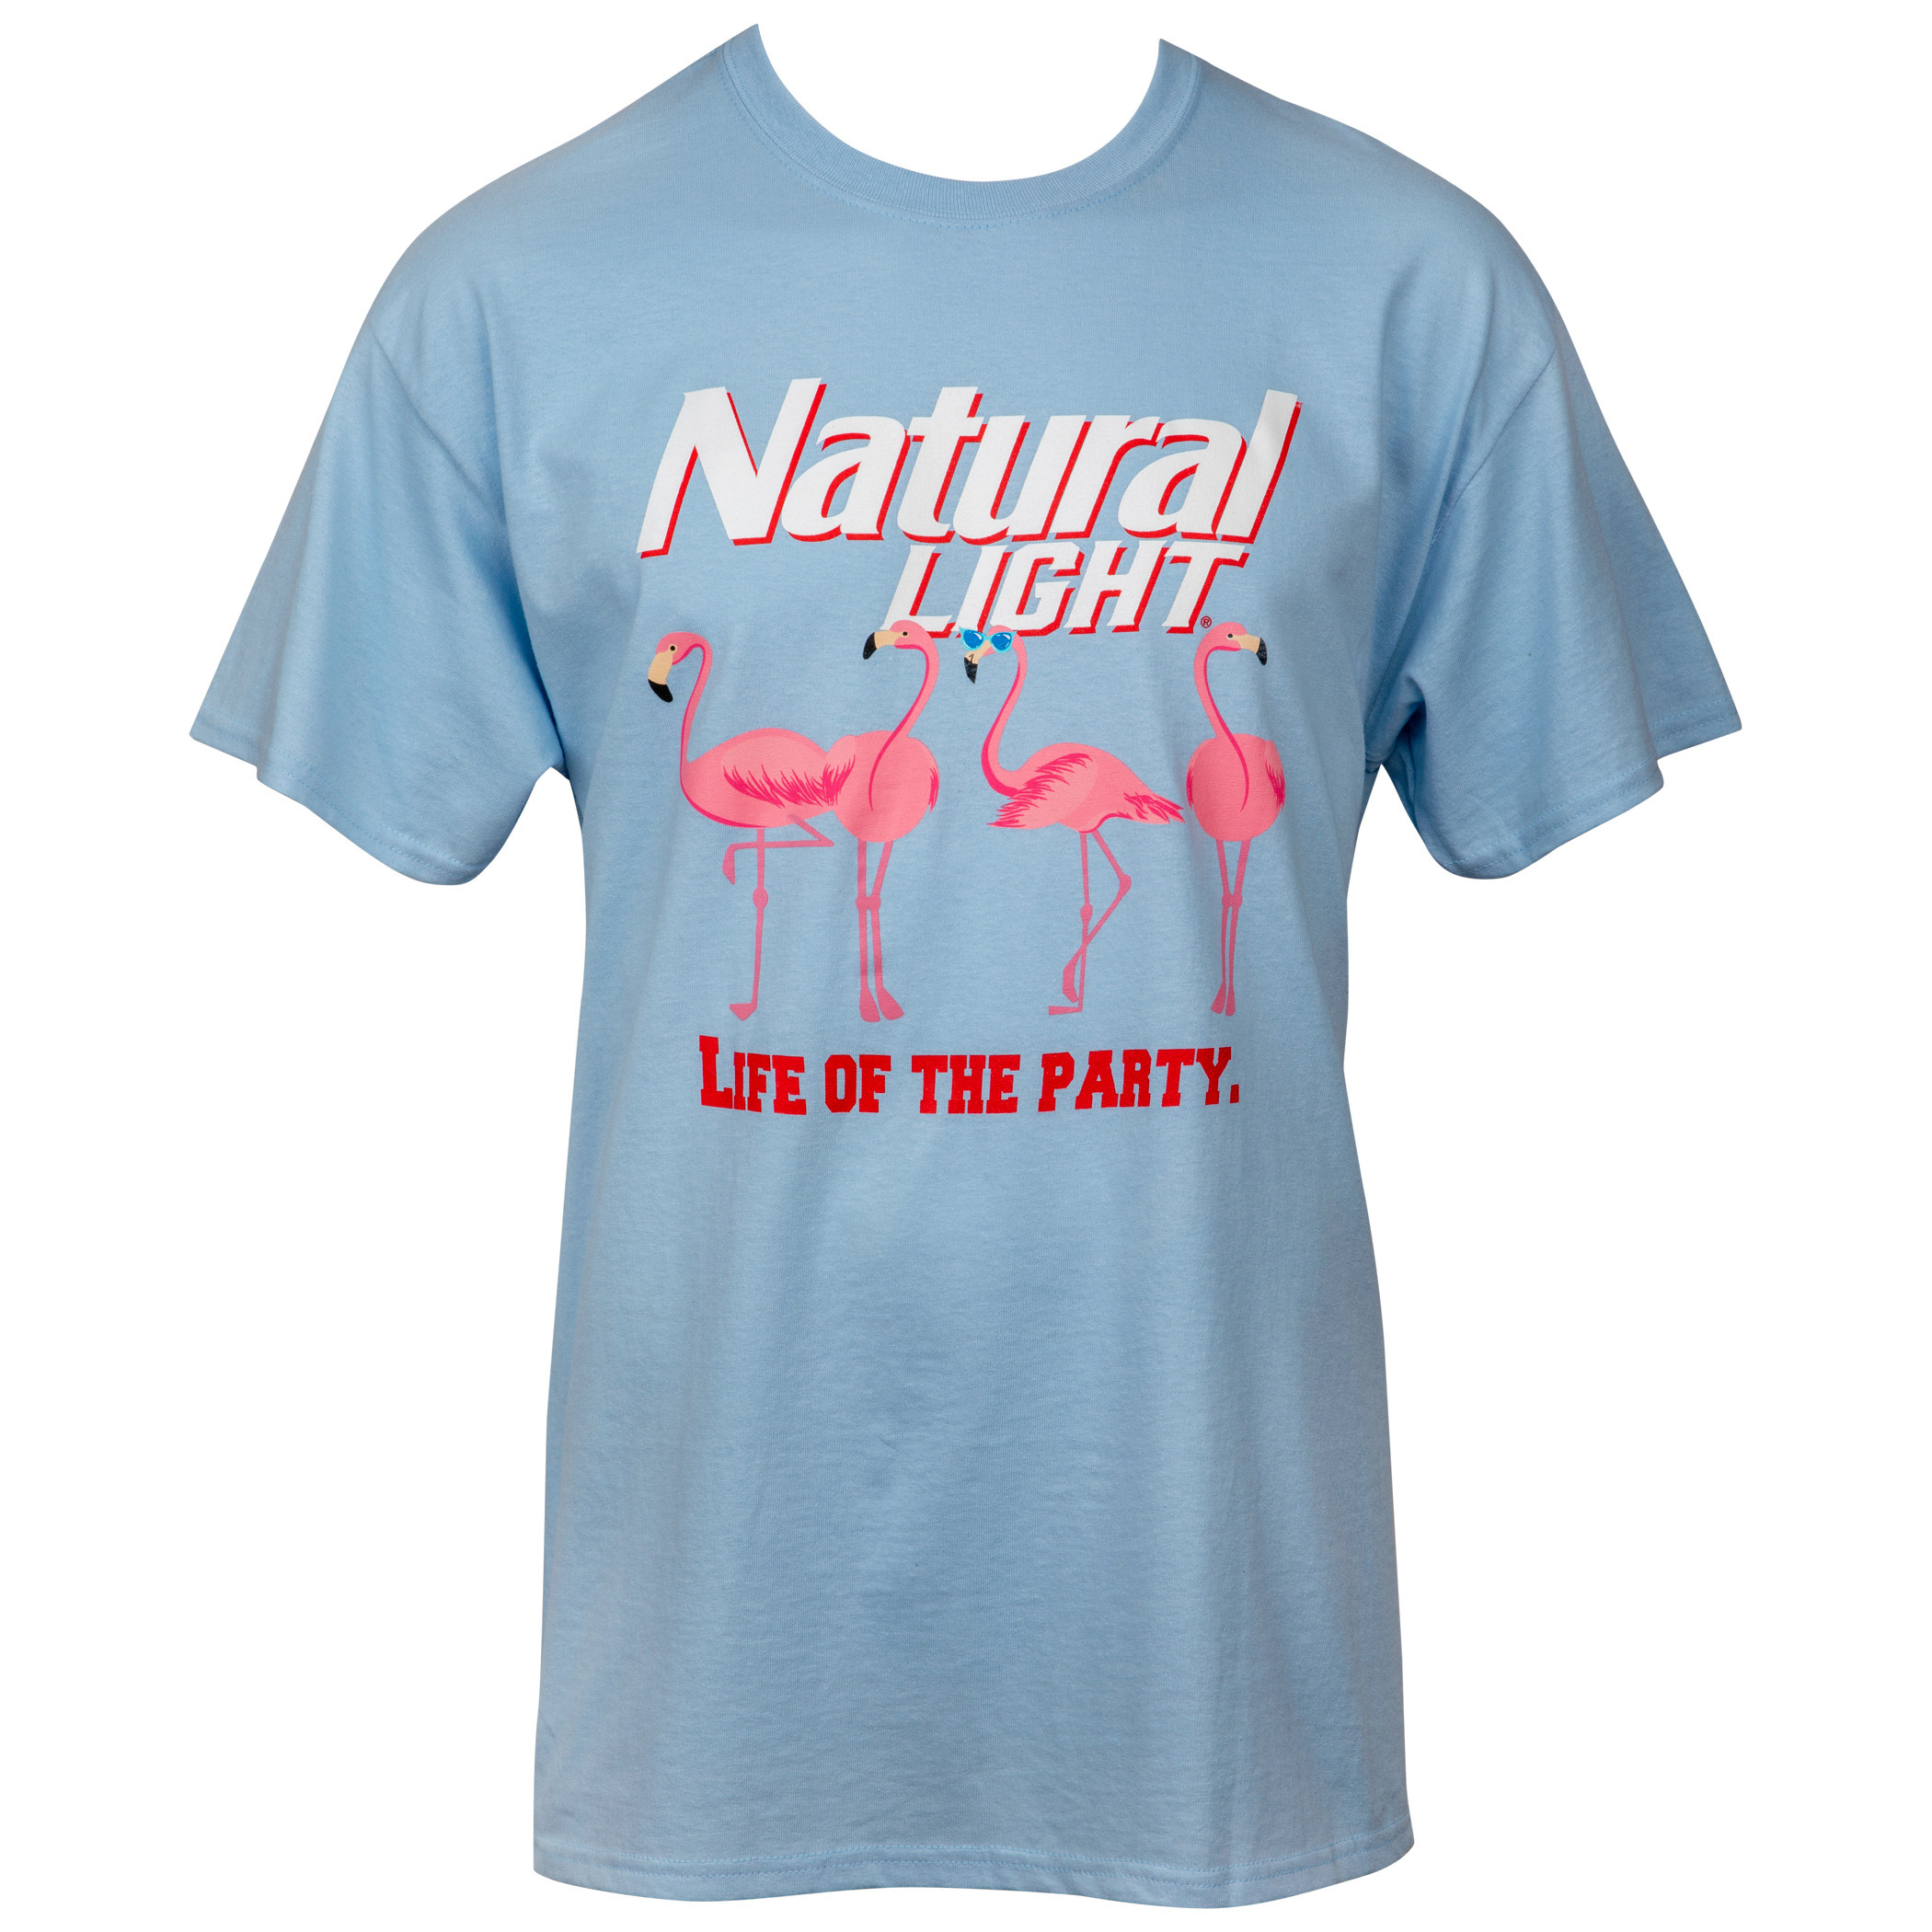 Natural Light Life of the Party T-Shirt